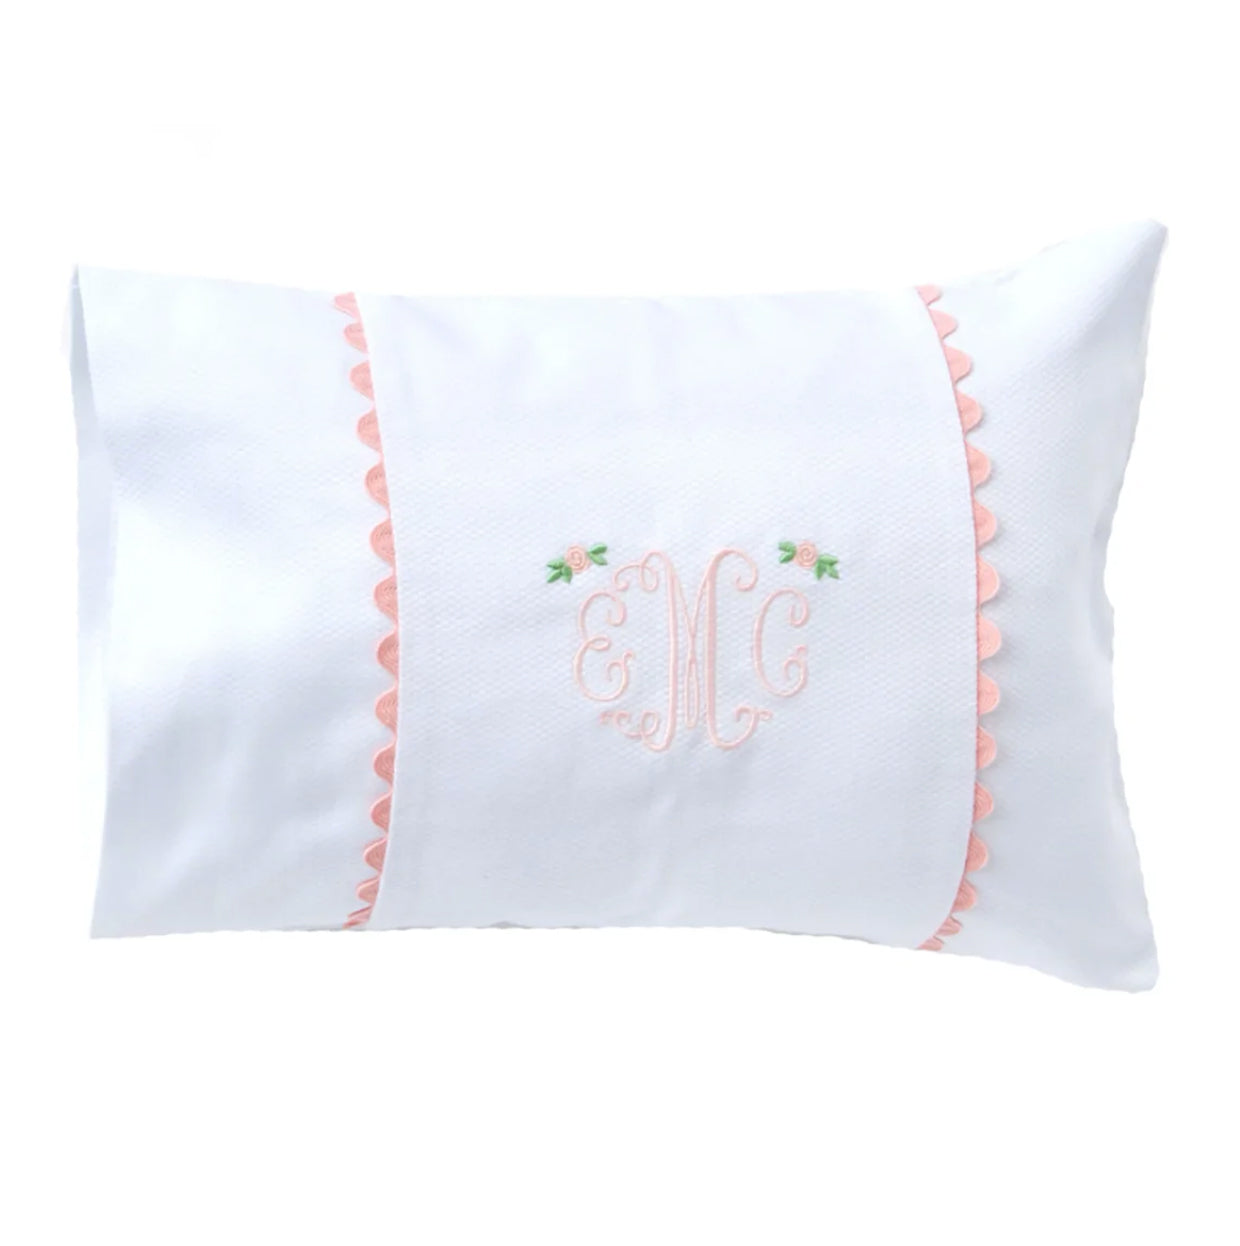 Baby Pillow with Pink Ric Rac Trim